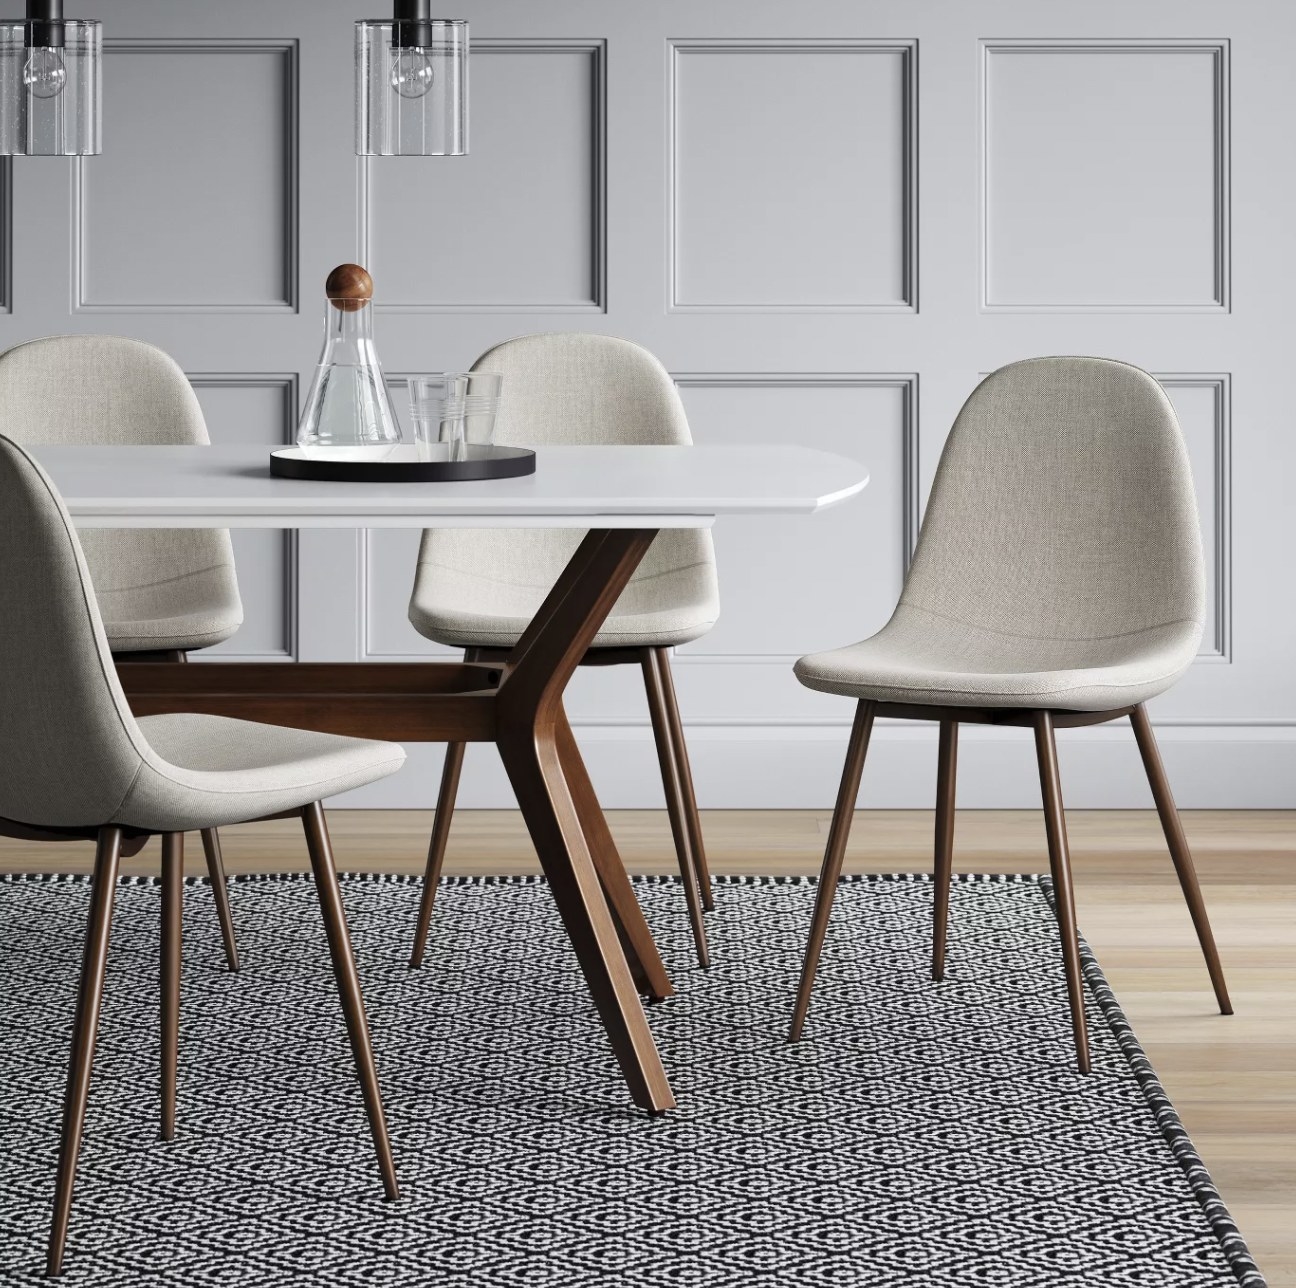 a beige upholstered dining chair with wooden legs